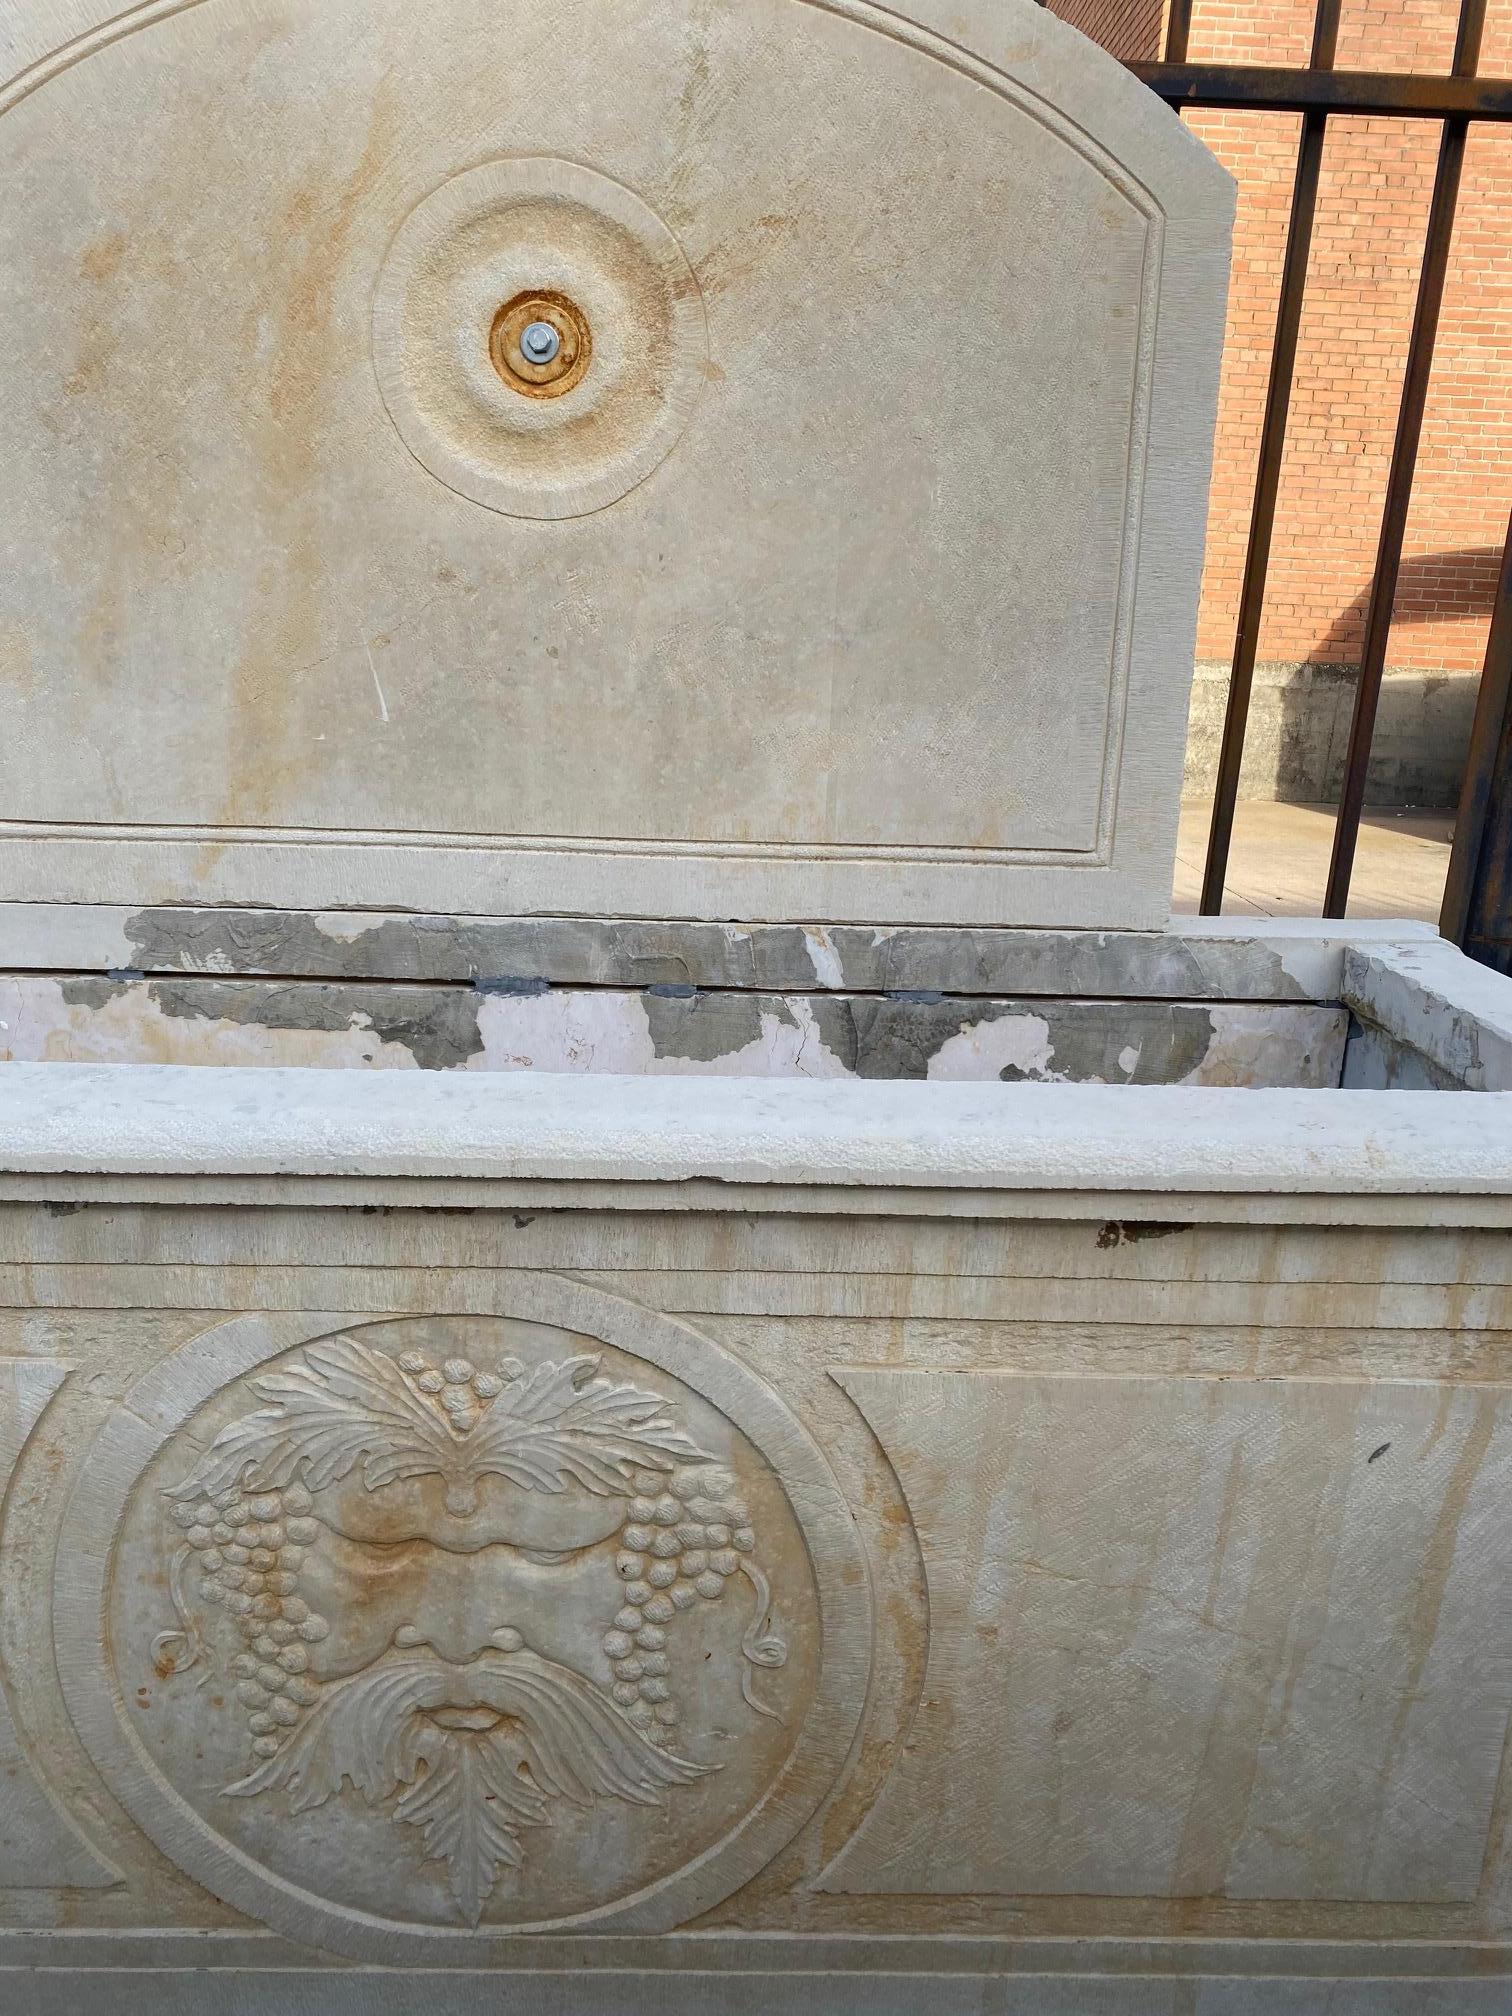 This limestone fountain origins from Italy, circa 1880.